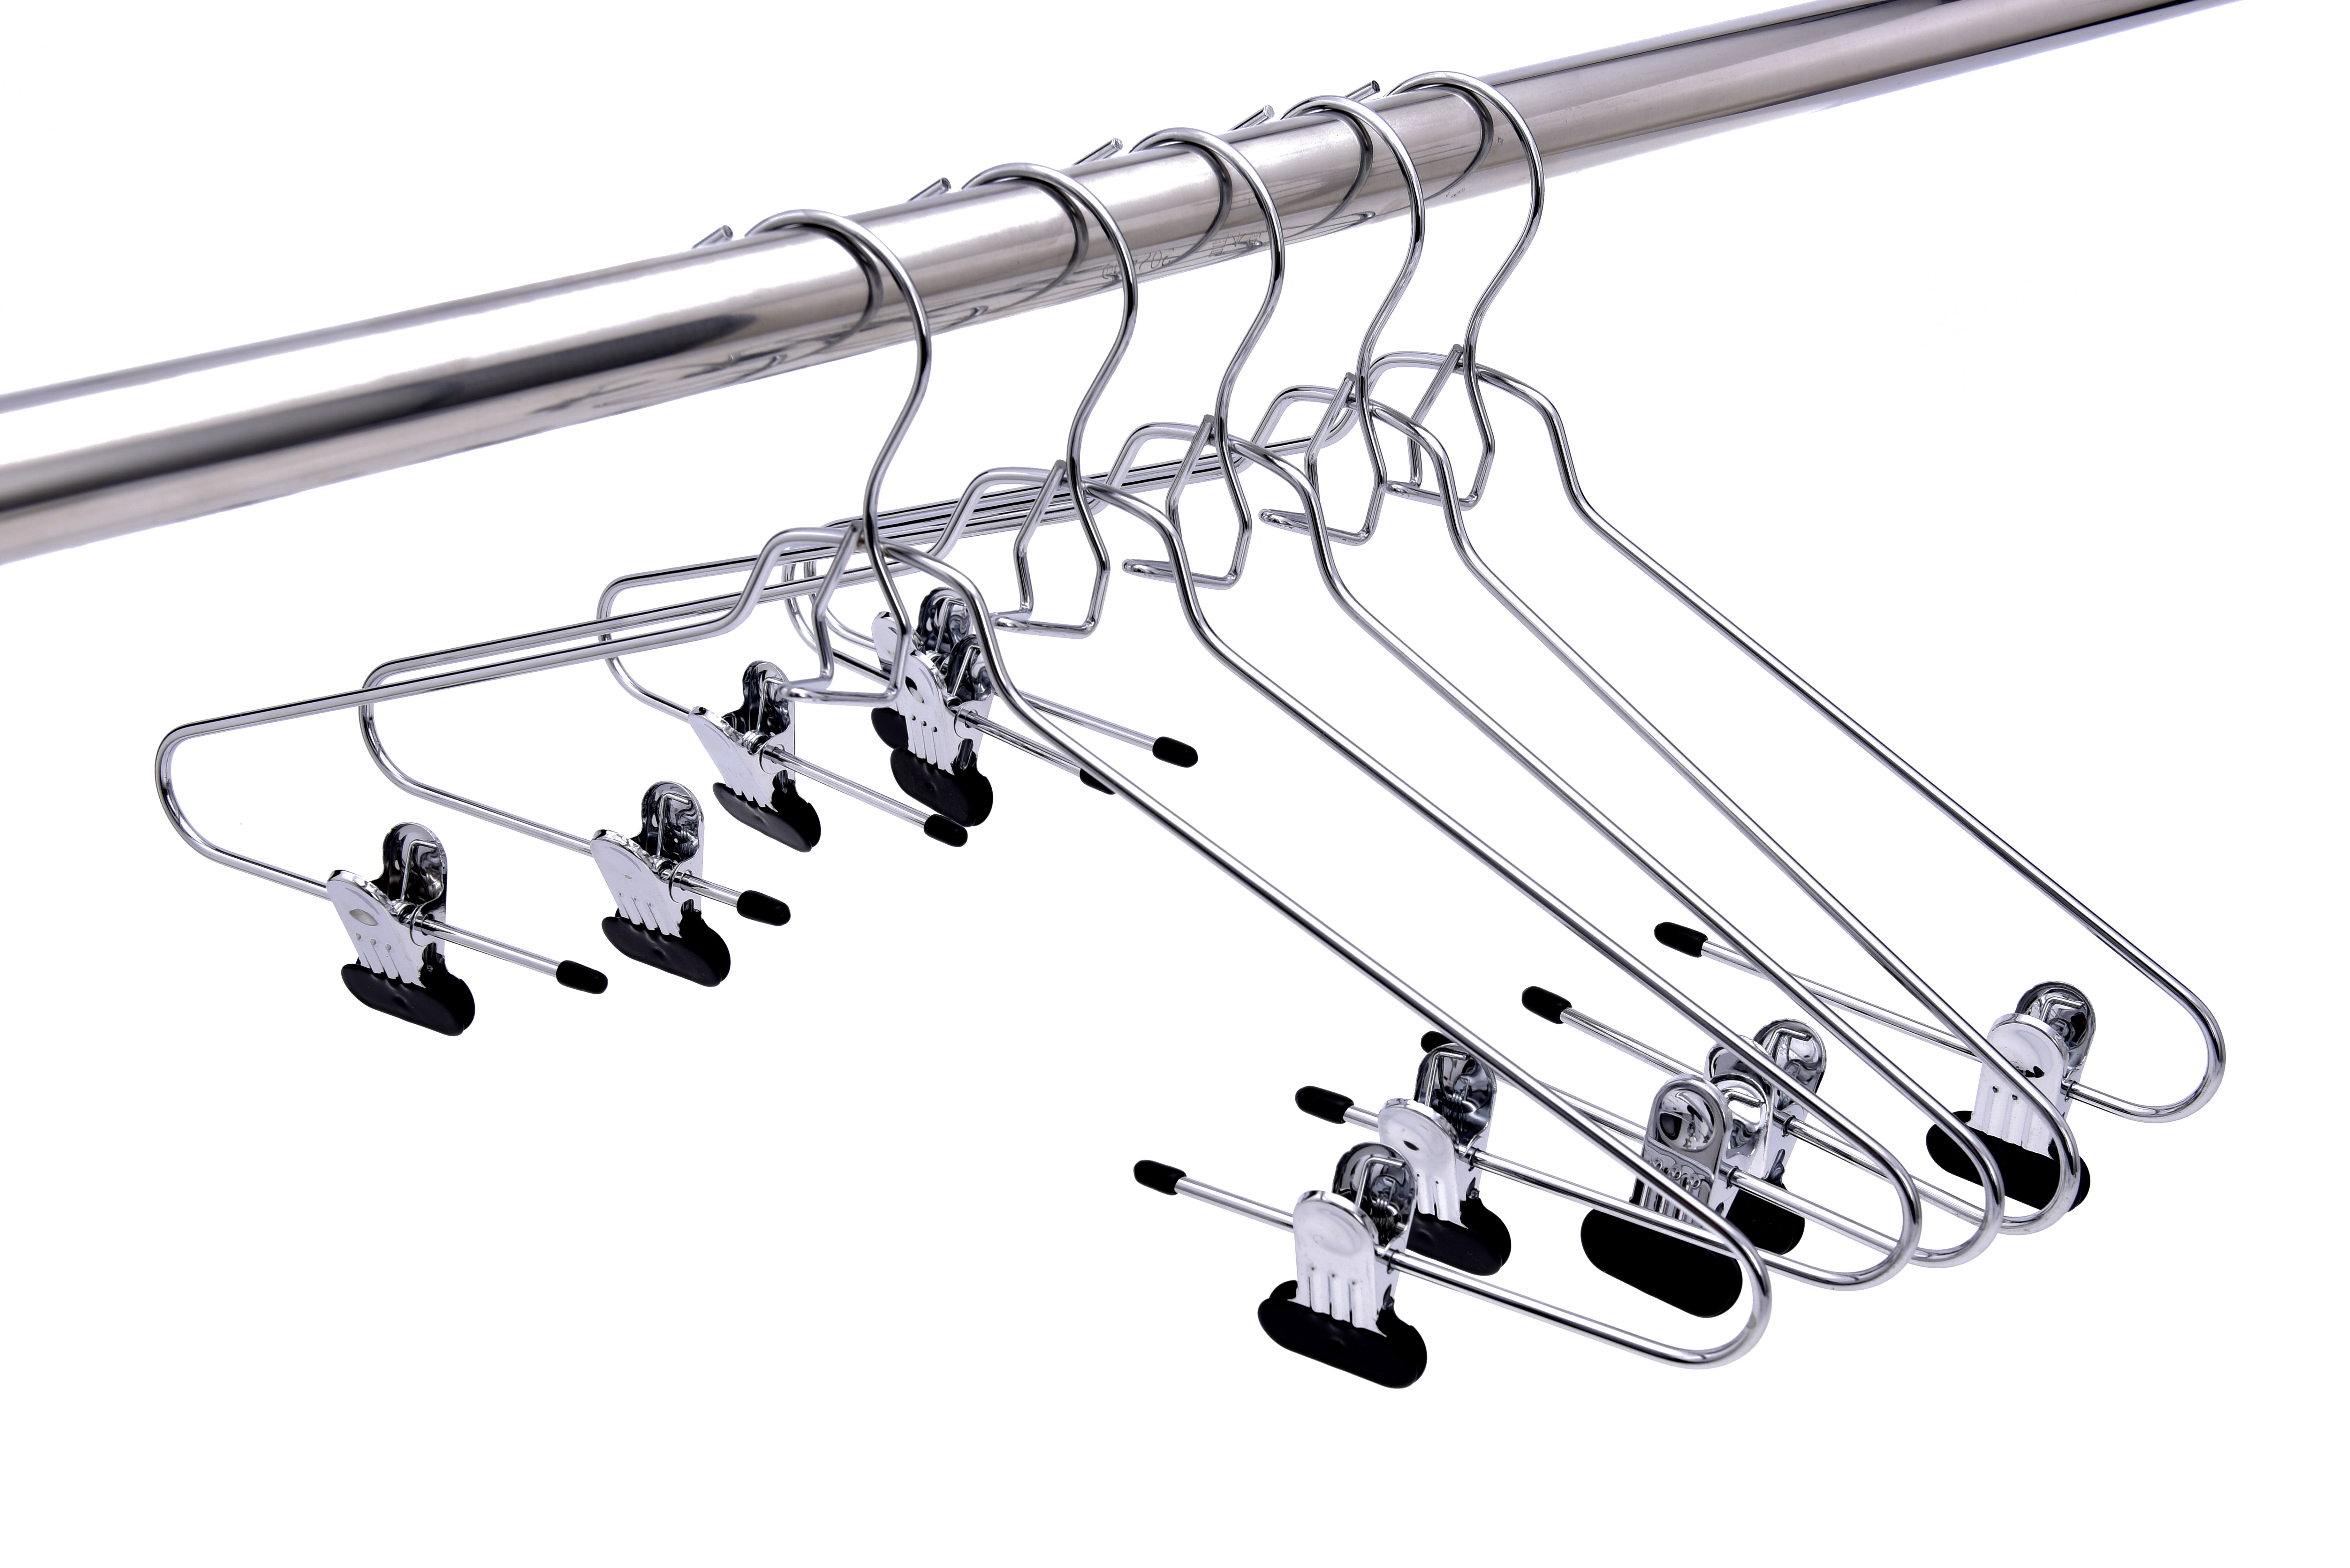 Quality Hangers Metal Non-Slip Hangers With Clips